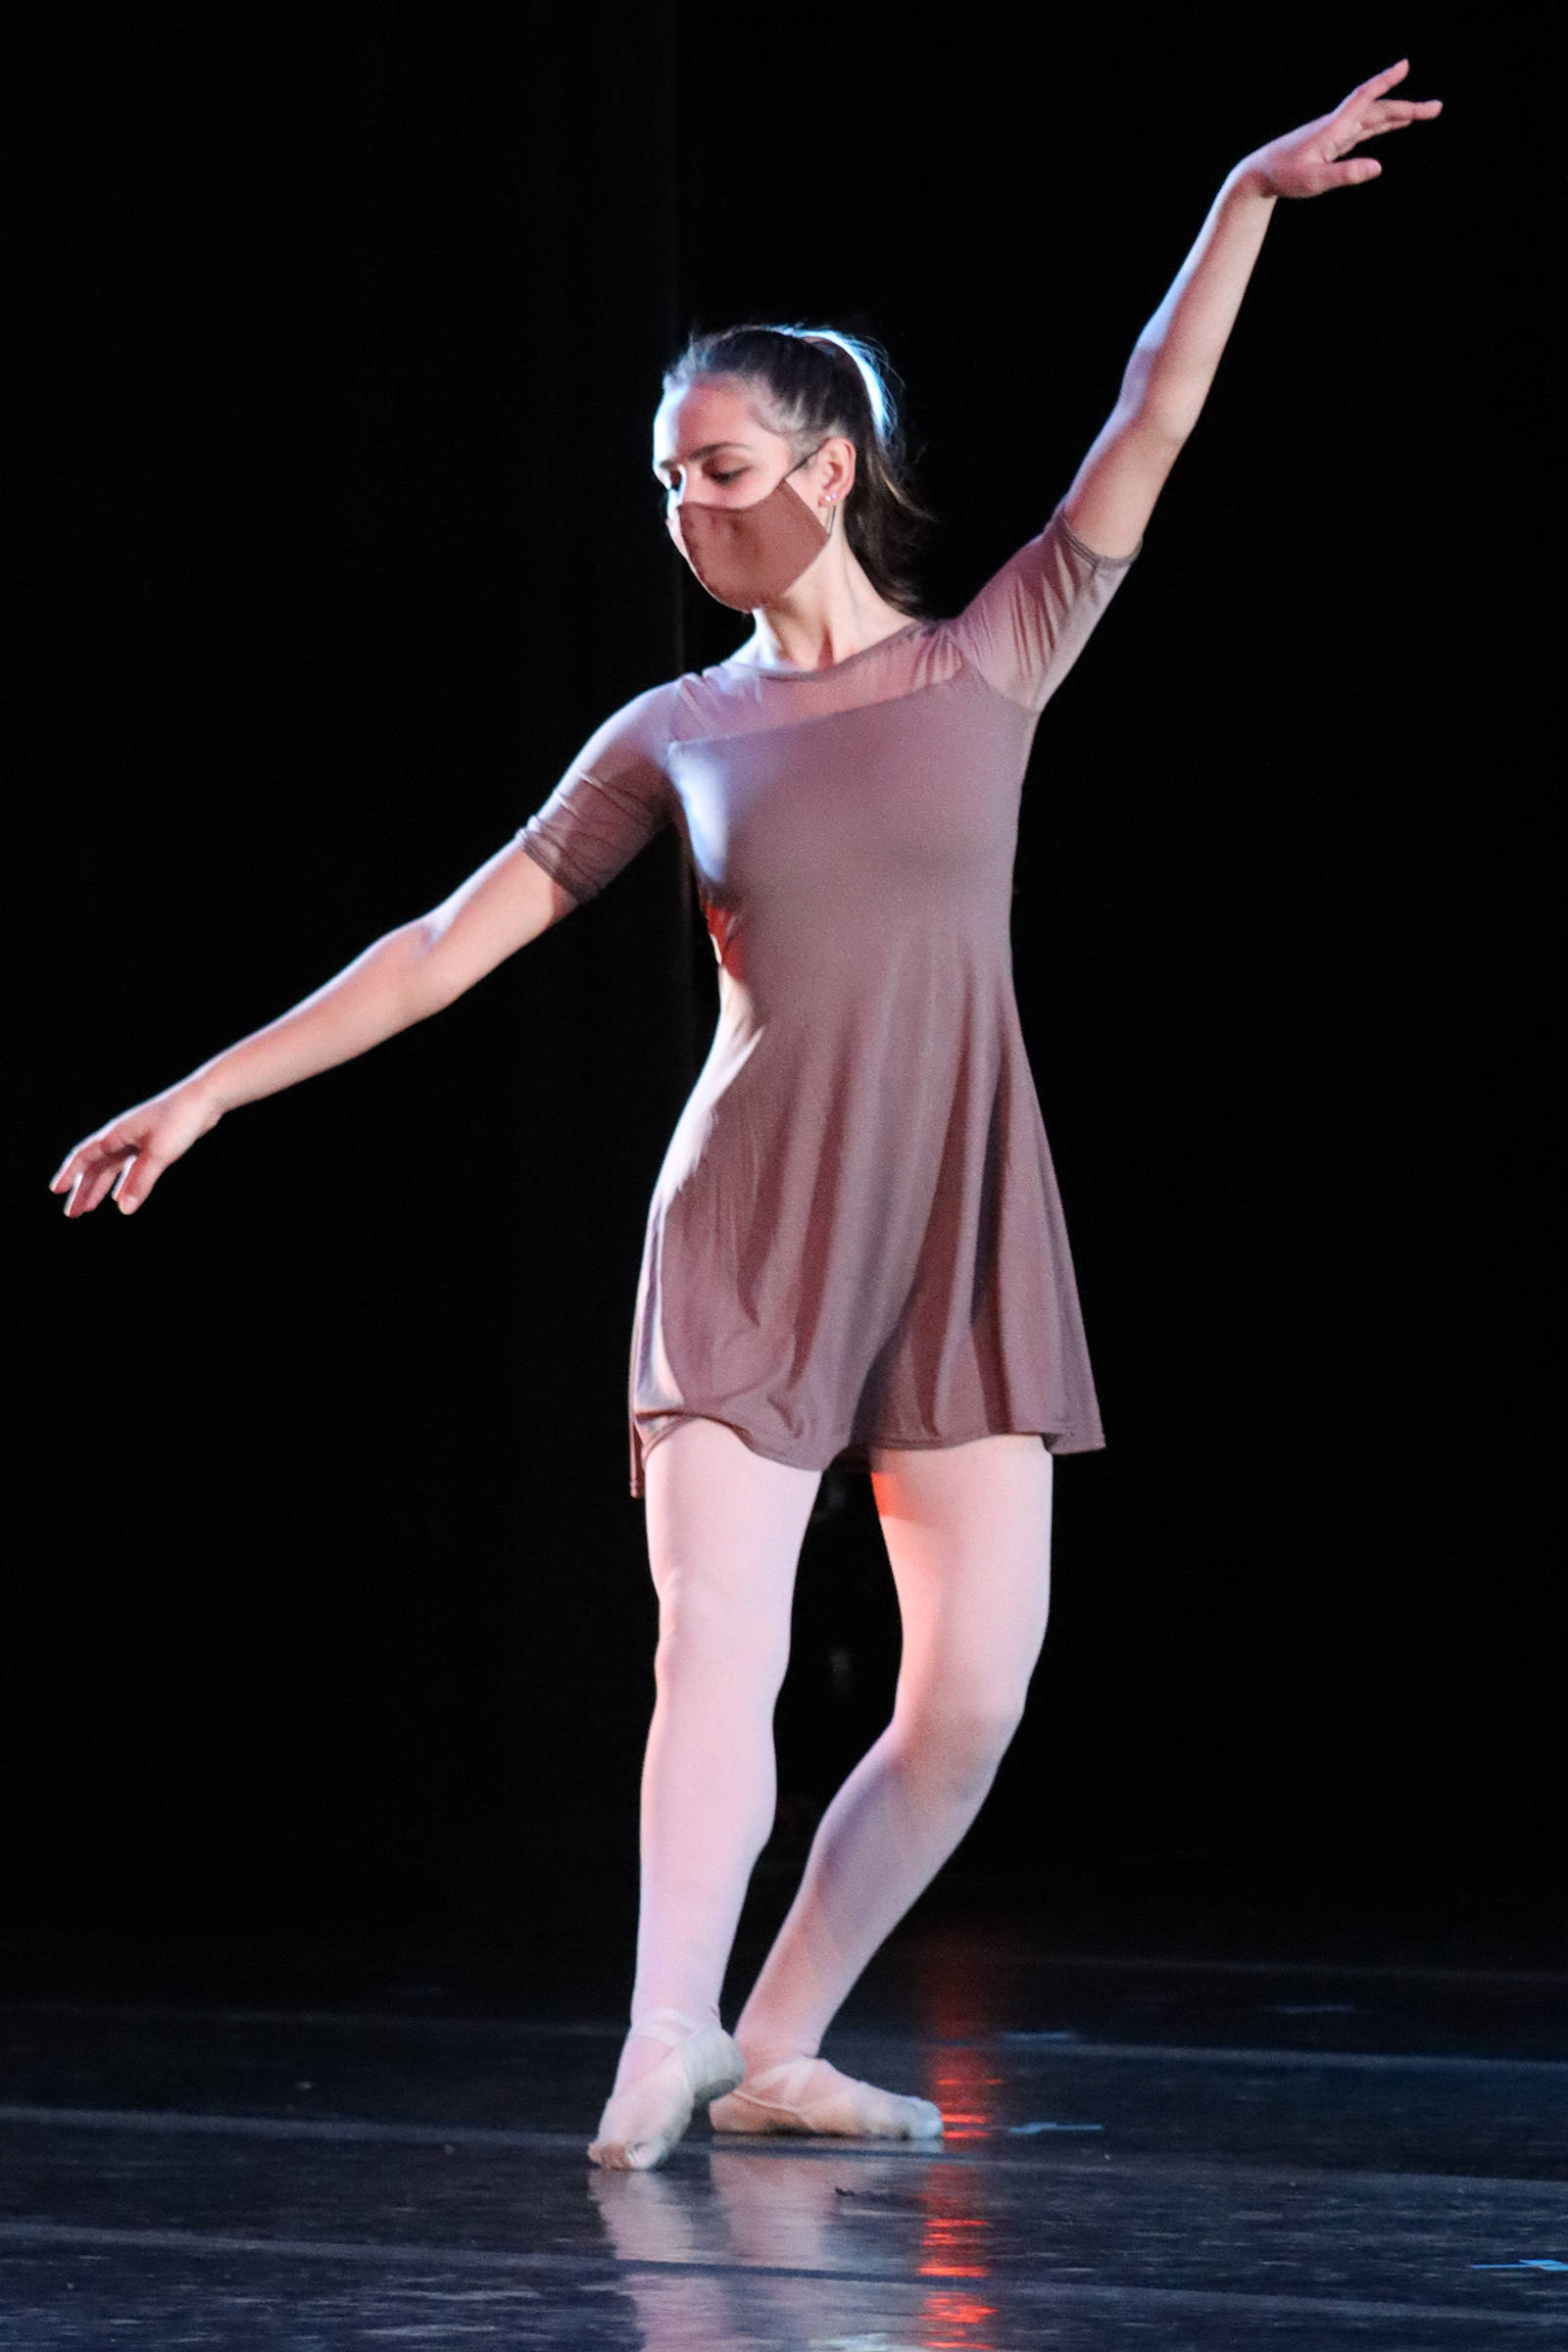 Lauryn Campos rehearses in “Blurred Visions” ahead of Juneau Dance Theatre’s “Spring Showcase.” “Blurred Visions” is collaboration between JDT alum Anna McDowell and Orpheus Project artistic director William Todd Hunt. (Ben Hohenstatt / Juneau Empire)